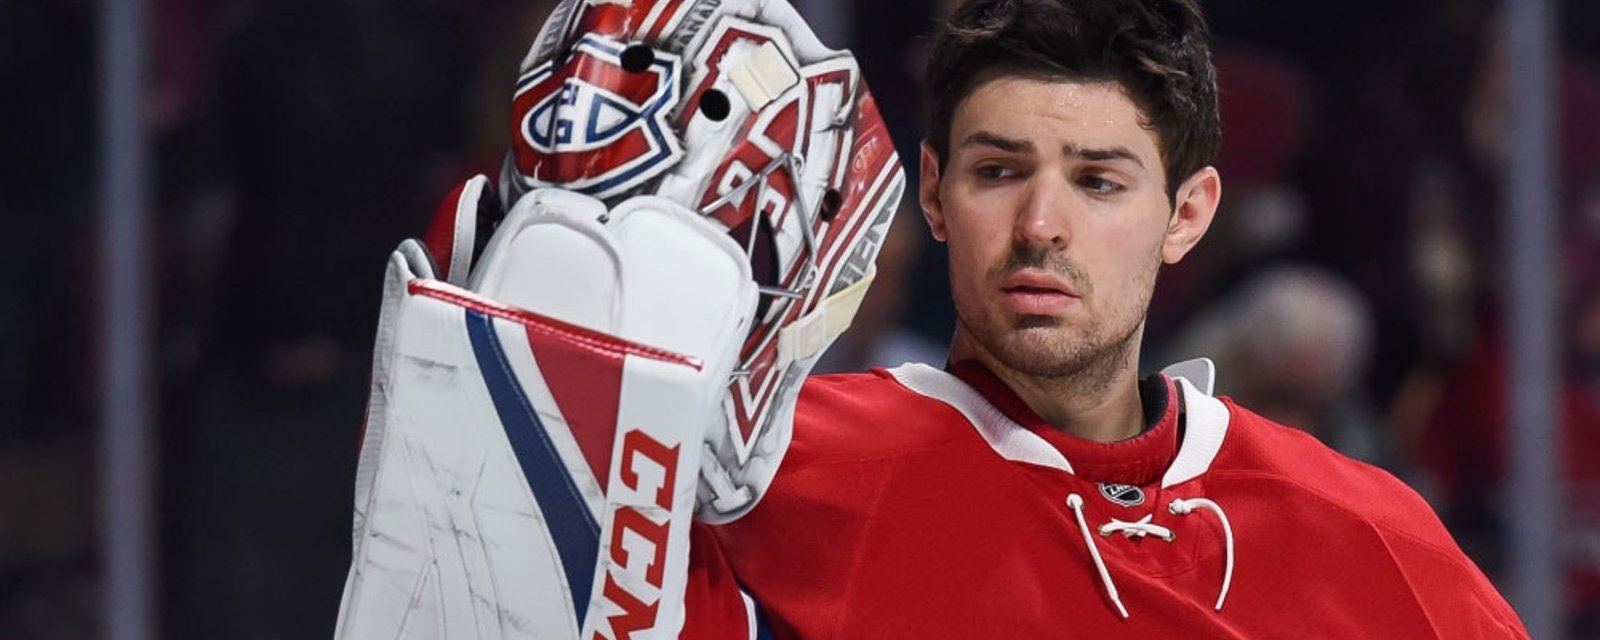 Breaking: Habs' Price makes HUGE mistake, which leads to Oilers goal!